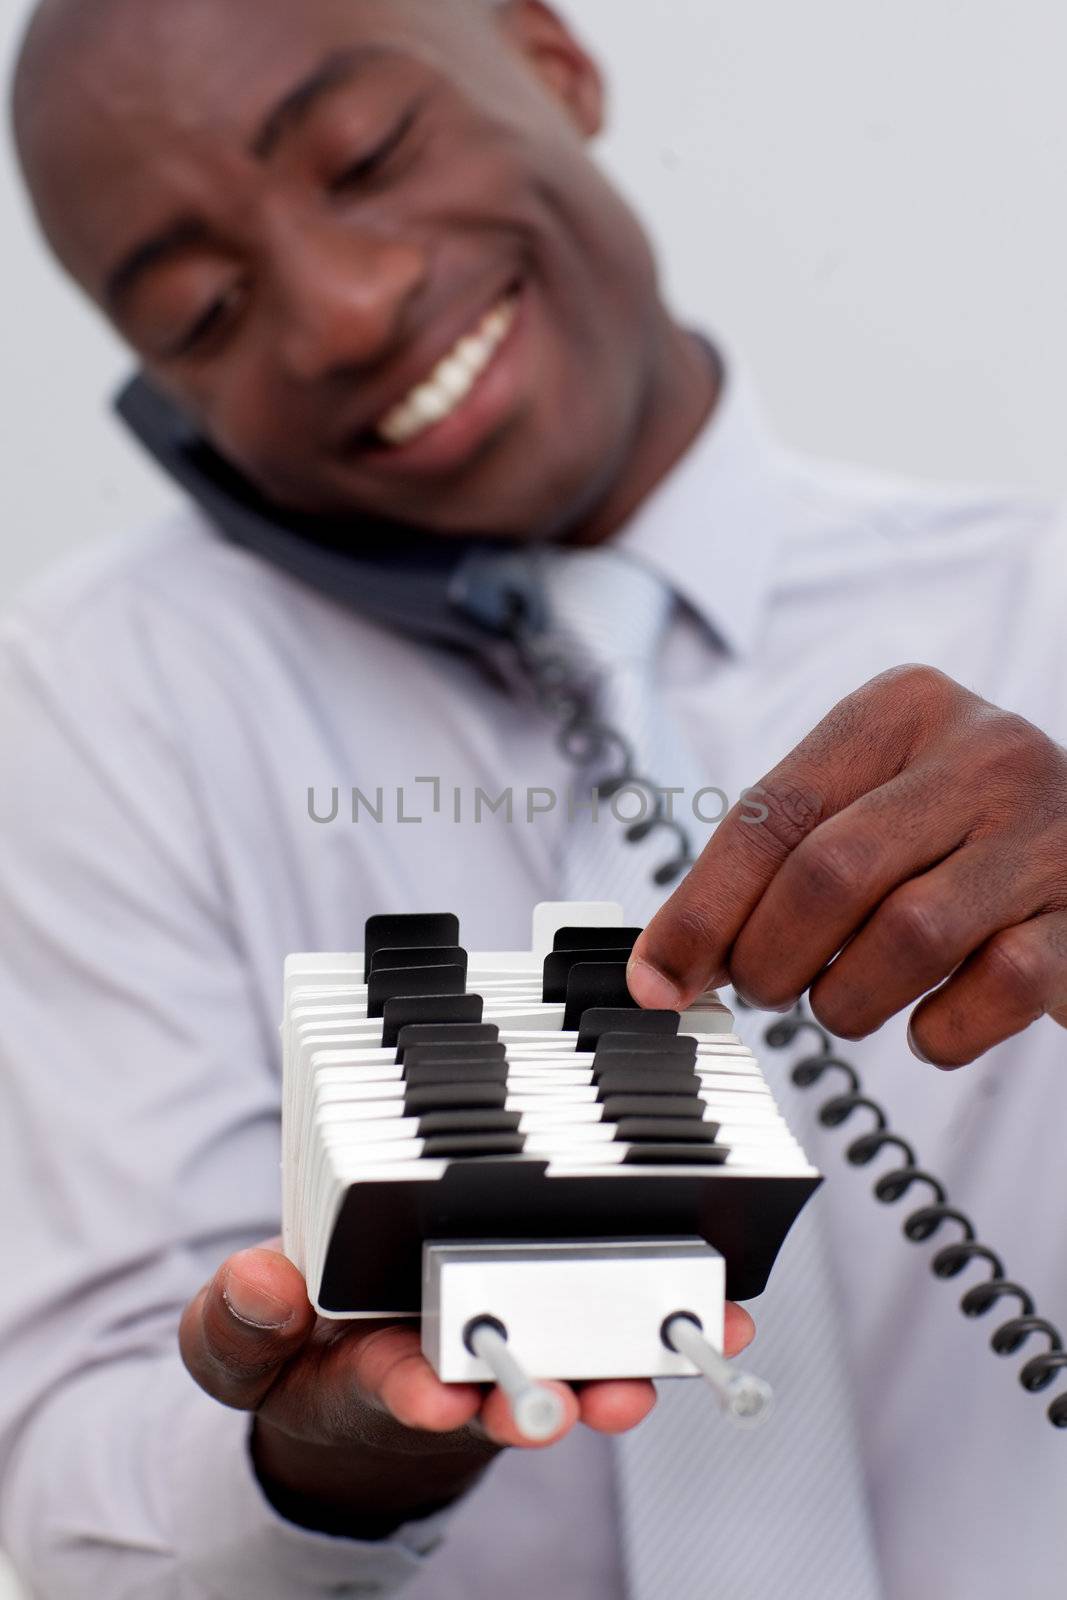 Afro-American businessman on phone searching for an index holder